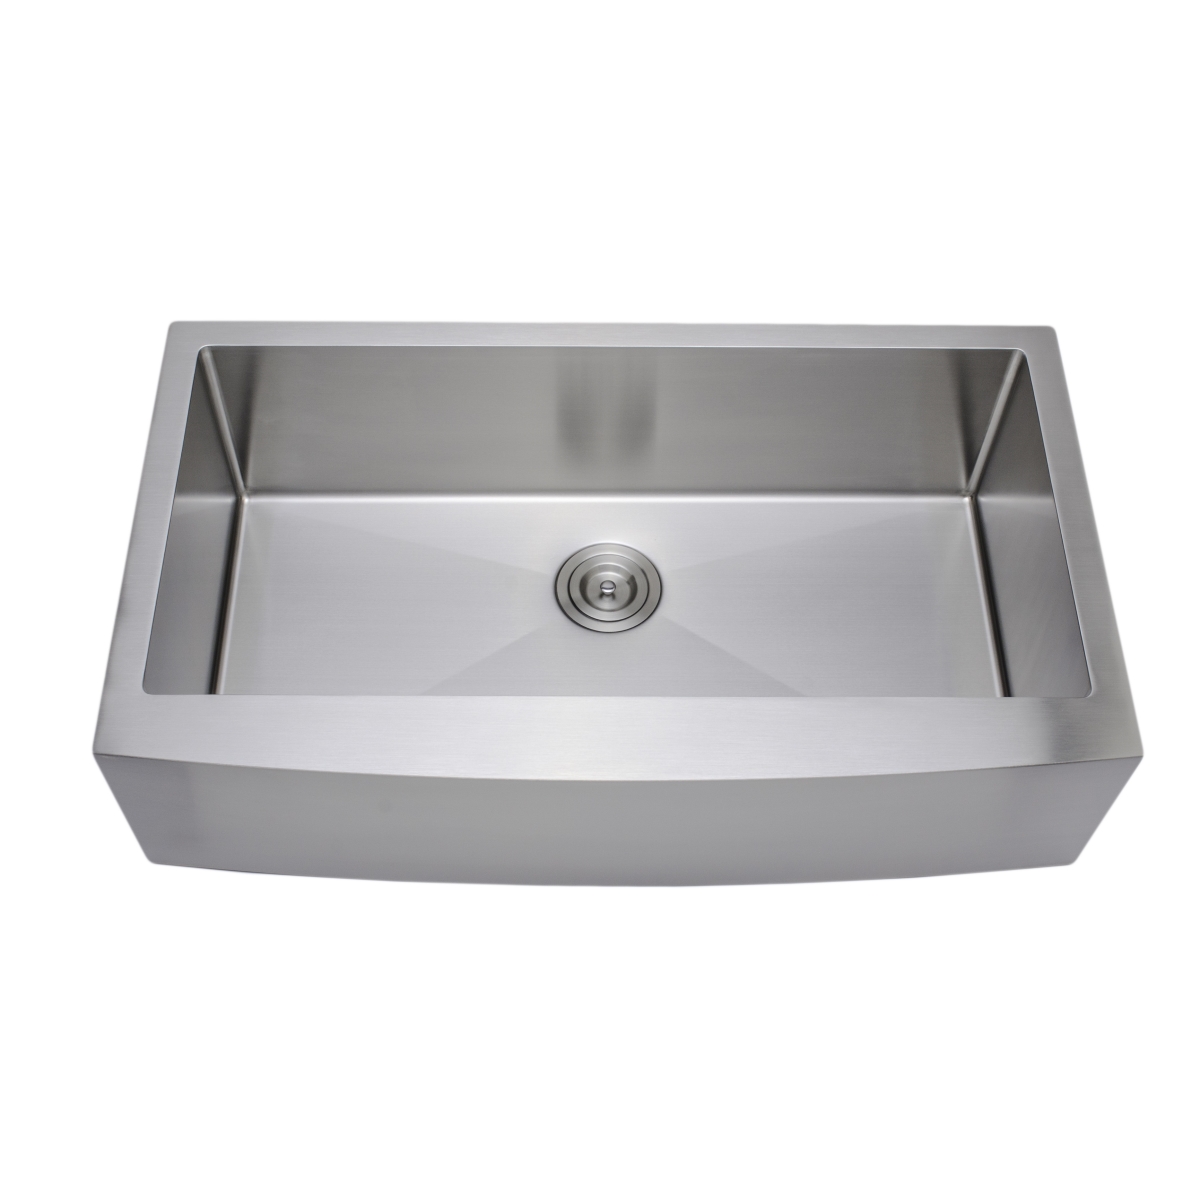 36 in. 16 Gauge Handcrafted Arched Apron Front Farmhouse Single Bowl Stainless Steel Kitchen Sink -  Desorden, DE3279305